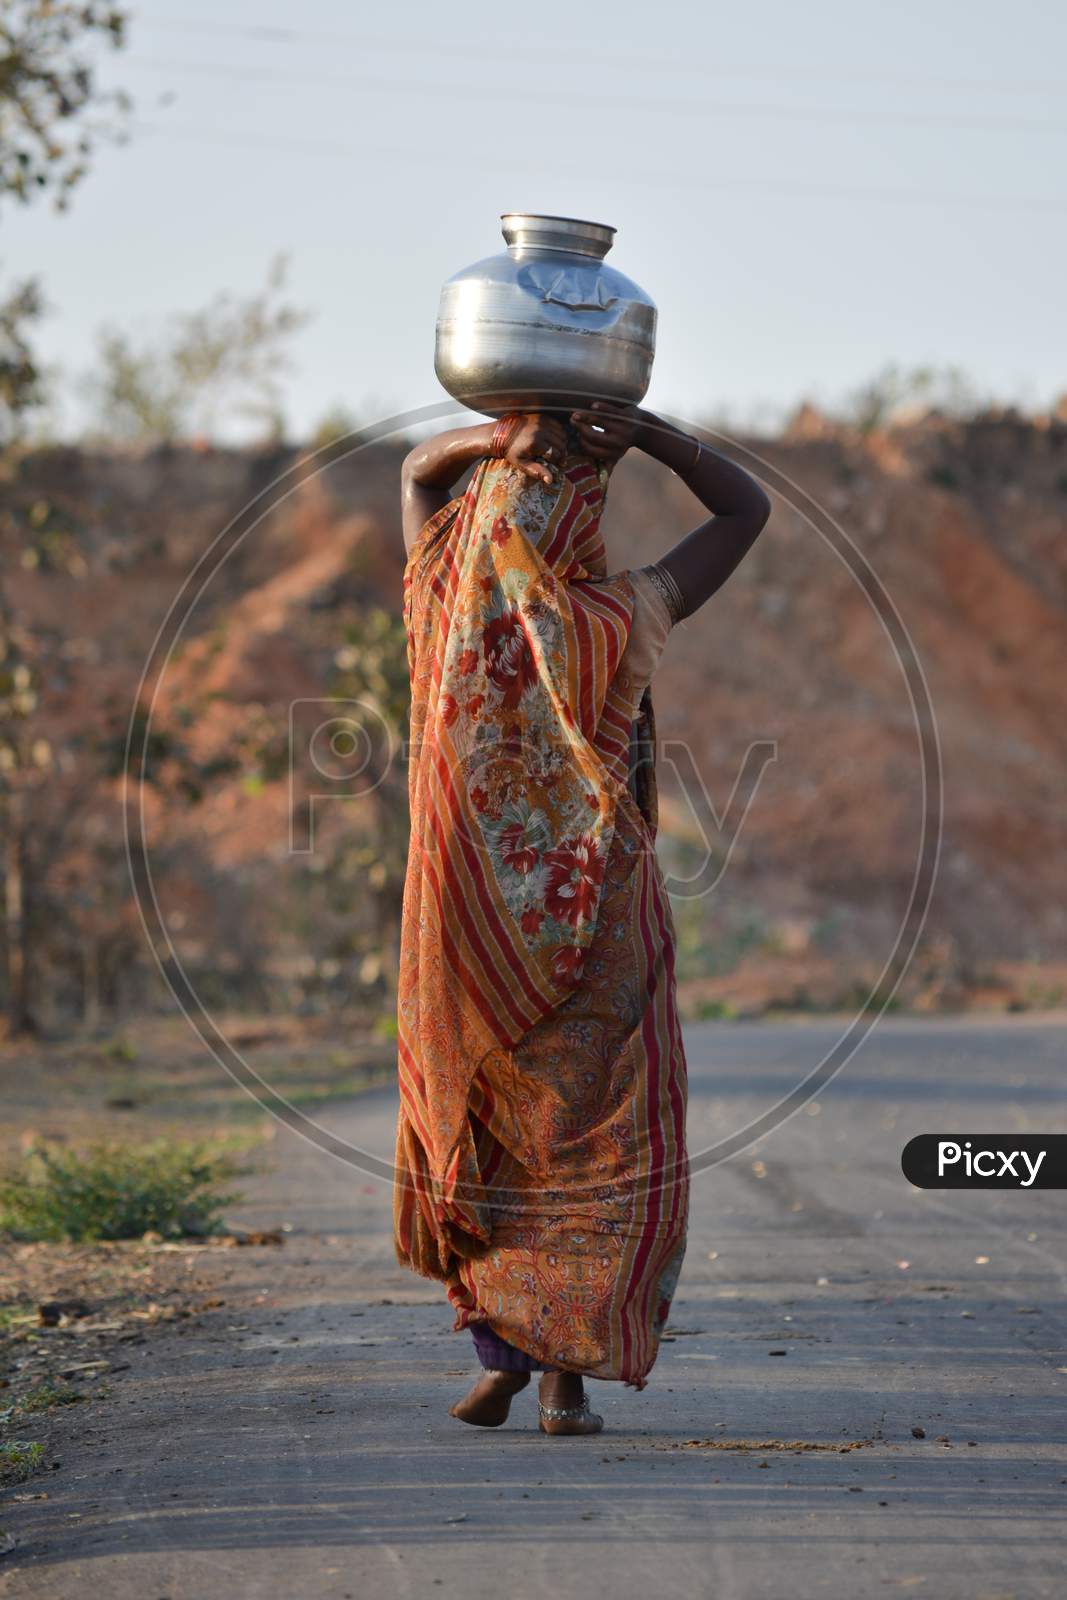 An Indian woman carrying a container of water on her head